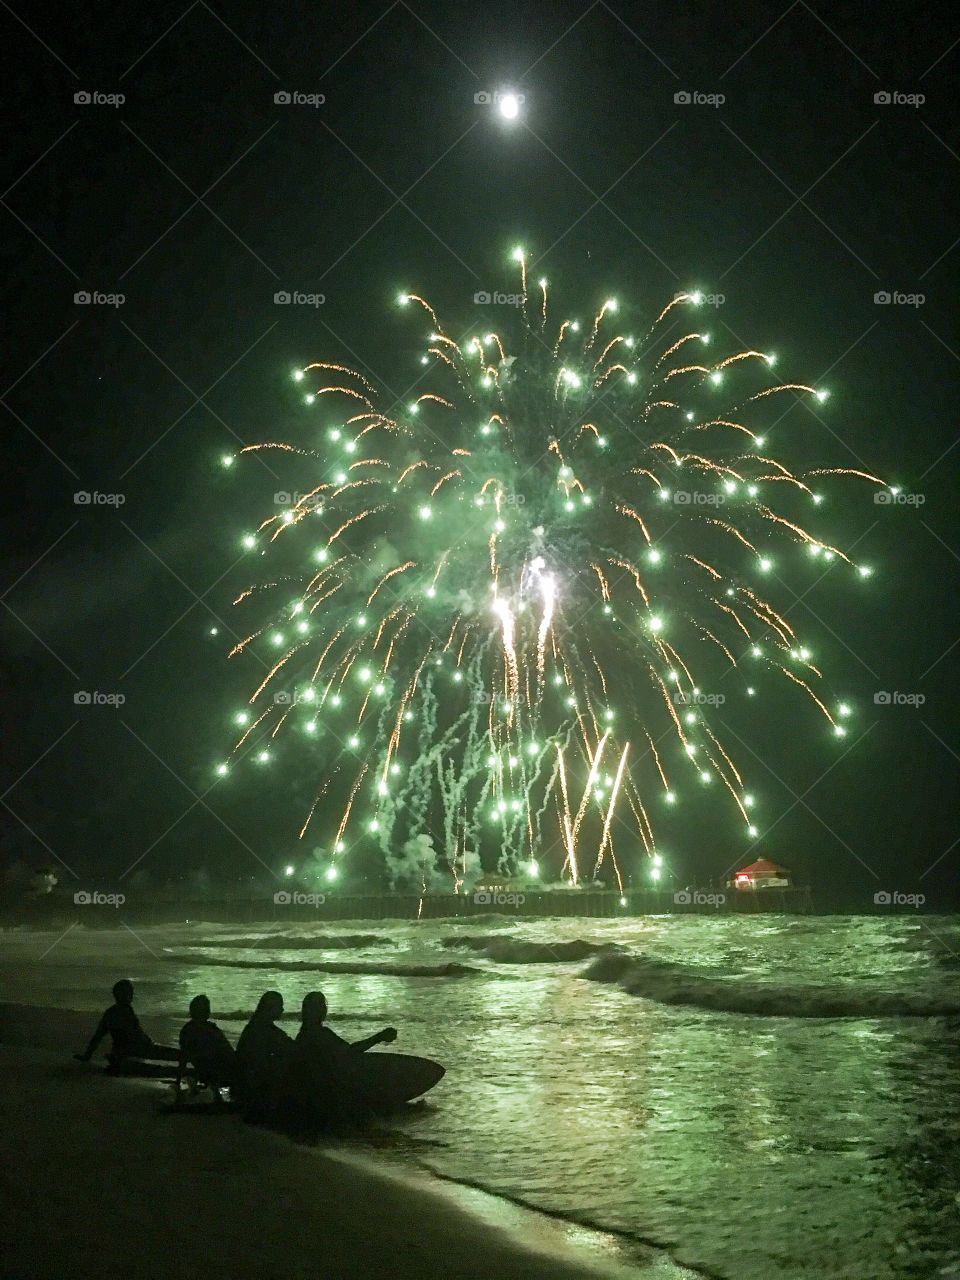 Fireworks, Surfers and Silhouettes